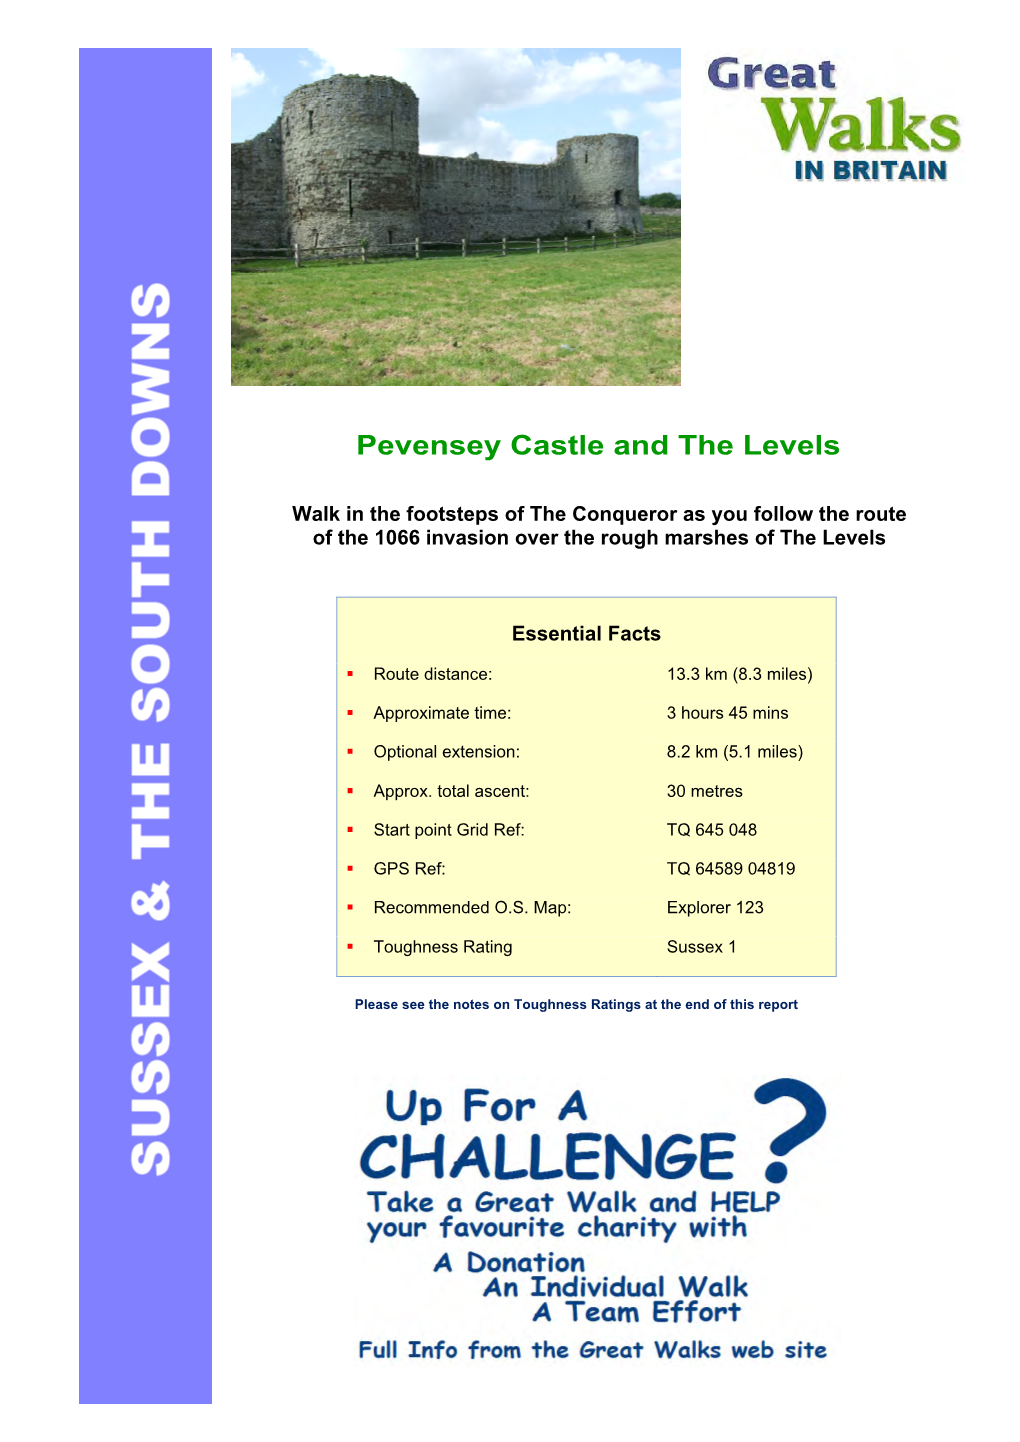 Pevensey Castle and the Levels